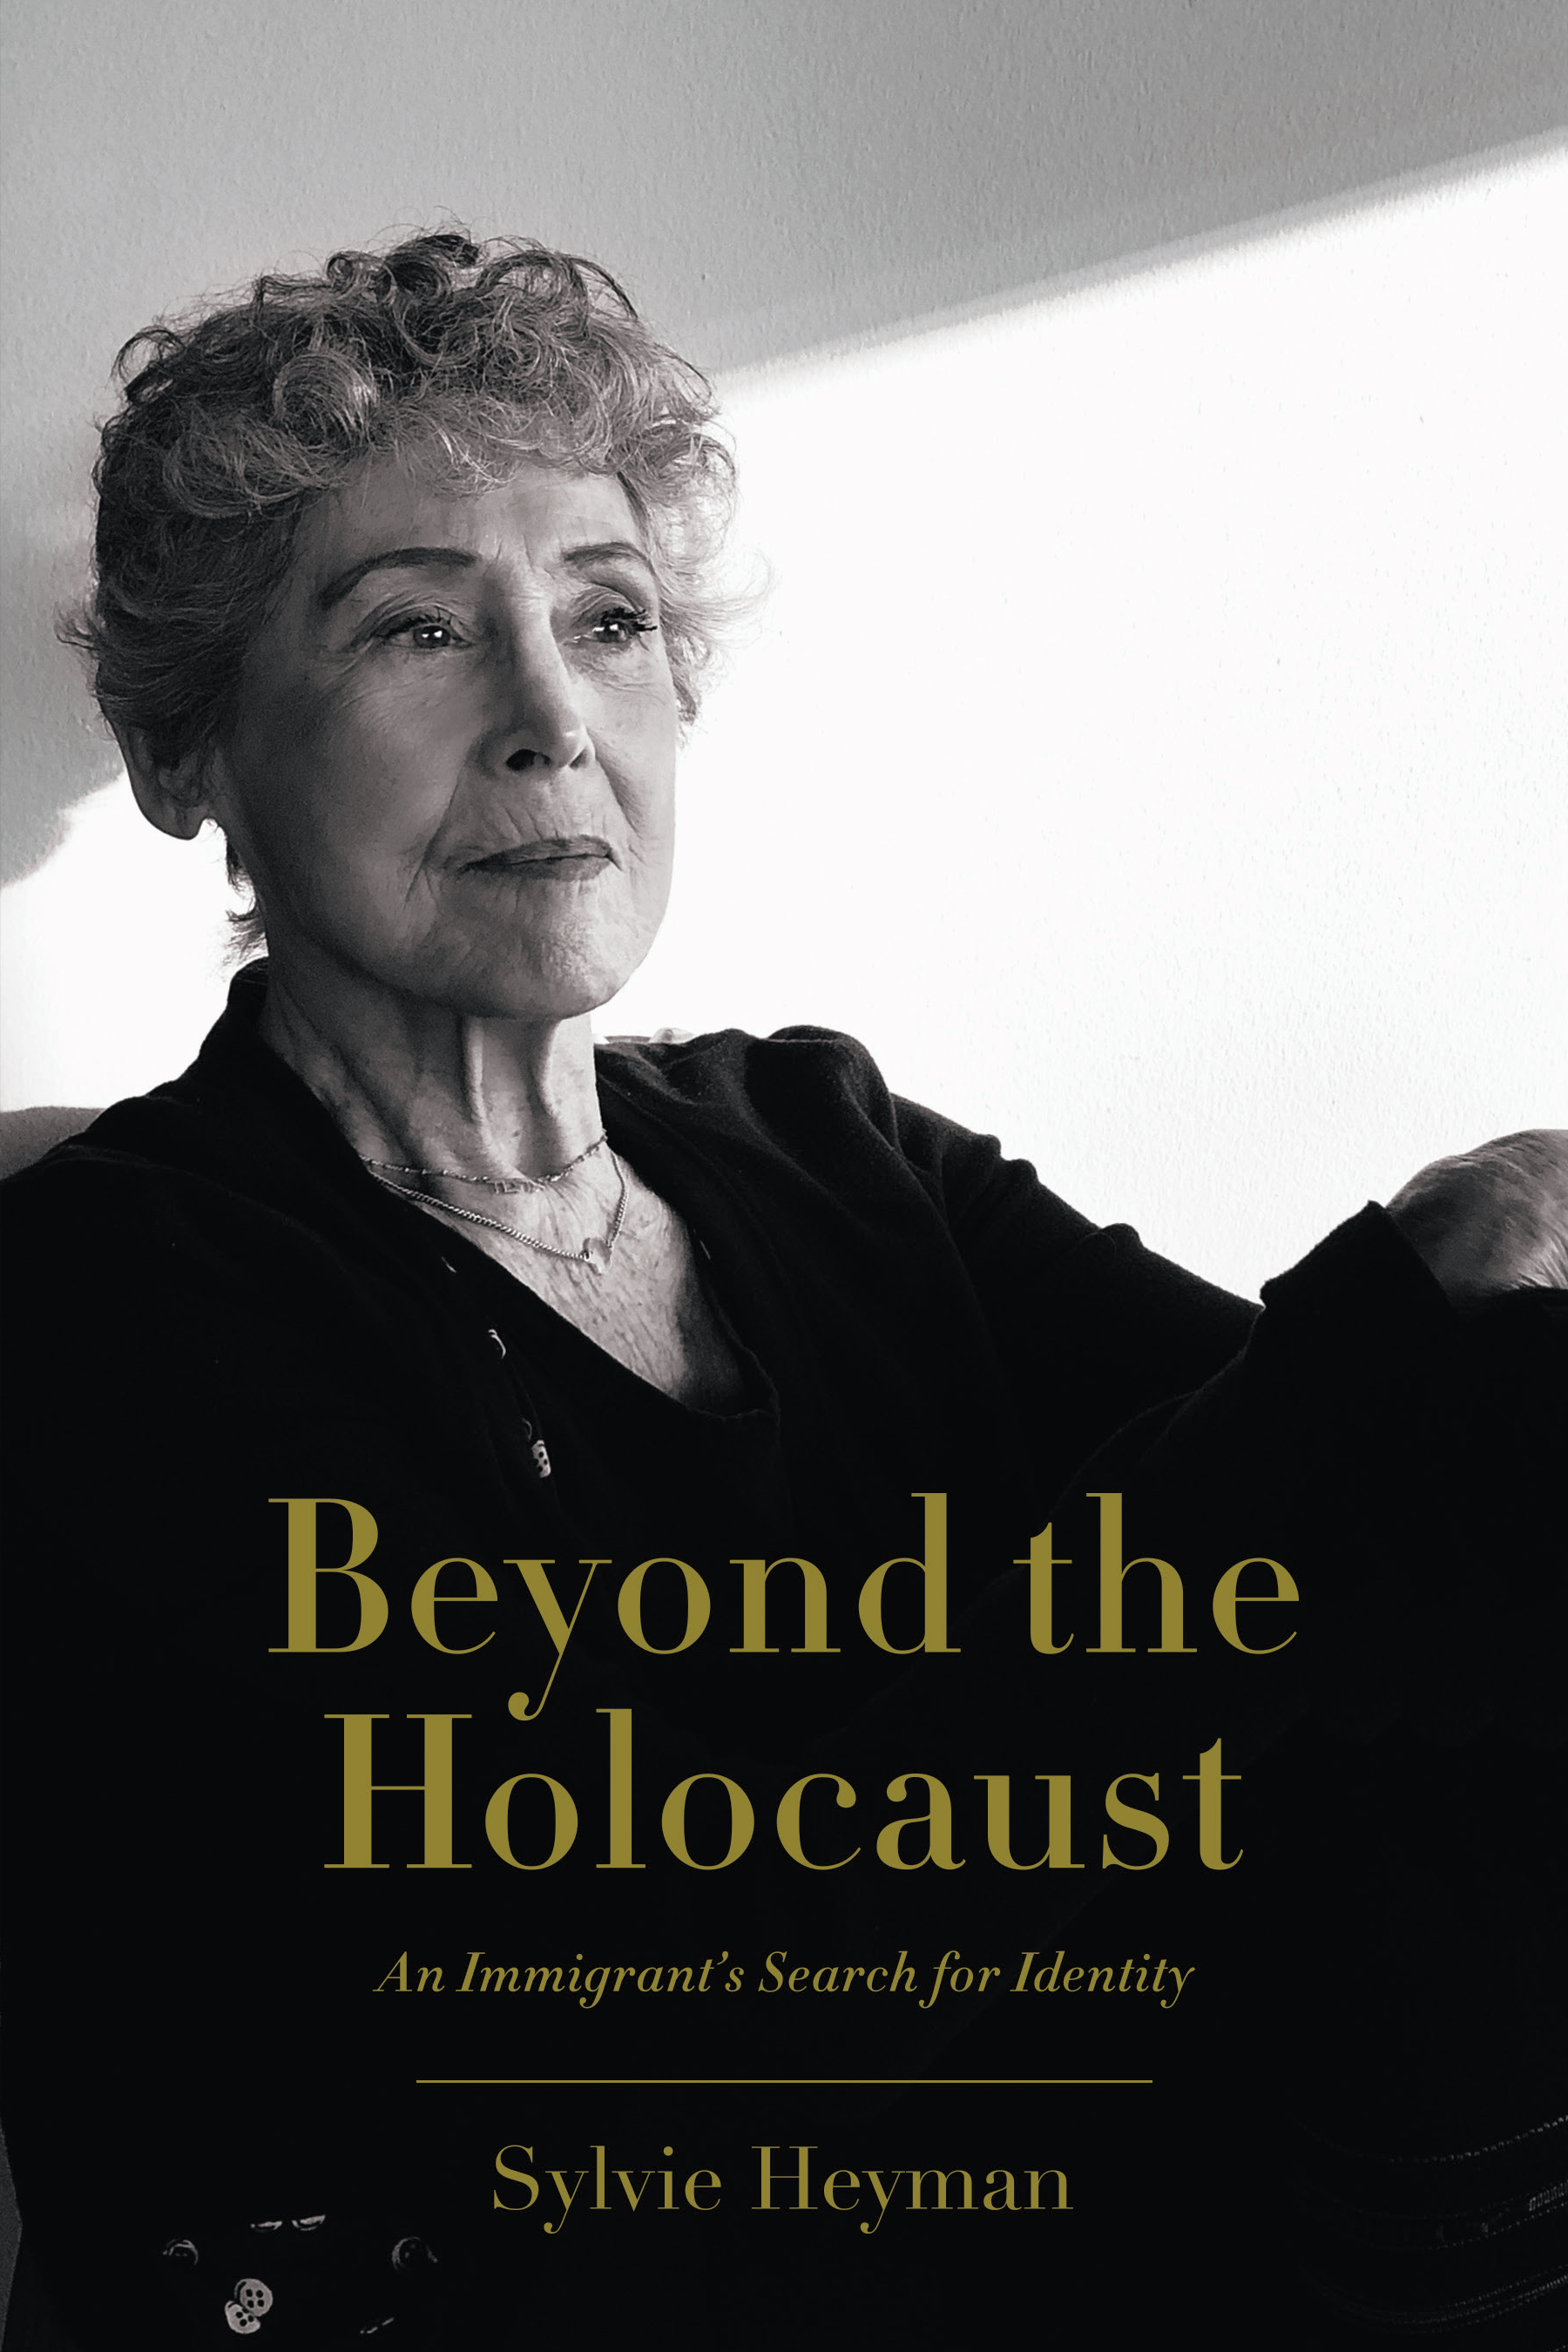 Book cover image of "Beyond the Holocaust" by Sylvie Heyman